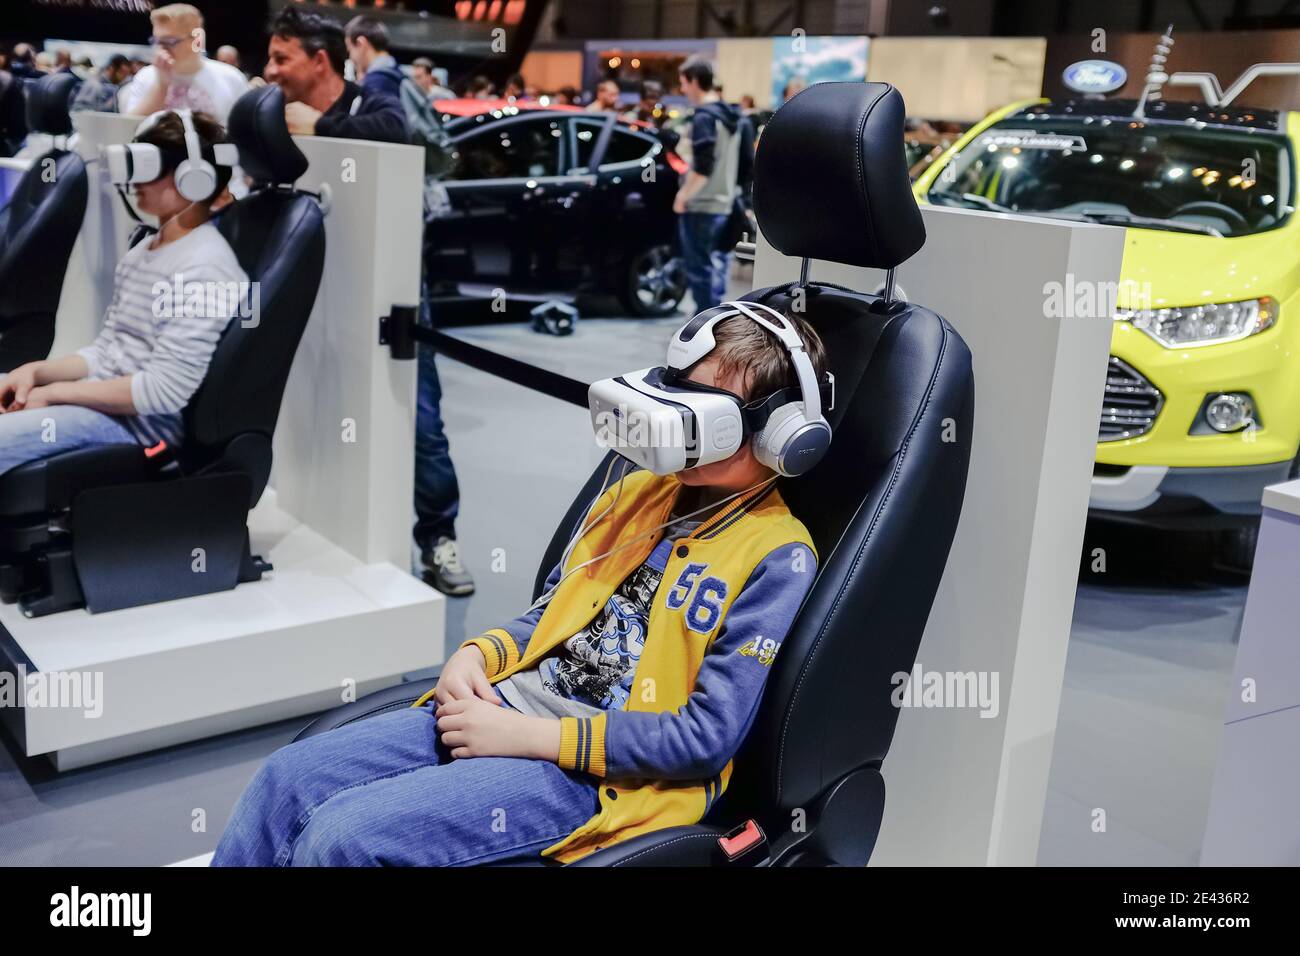 Young guy using vr headset for visual 3d experience in an tech exibition show. Stock Photo